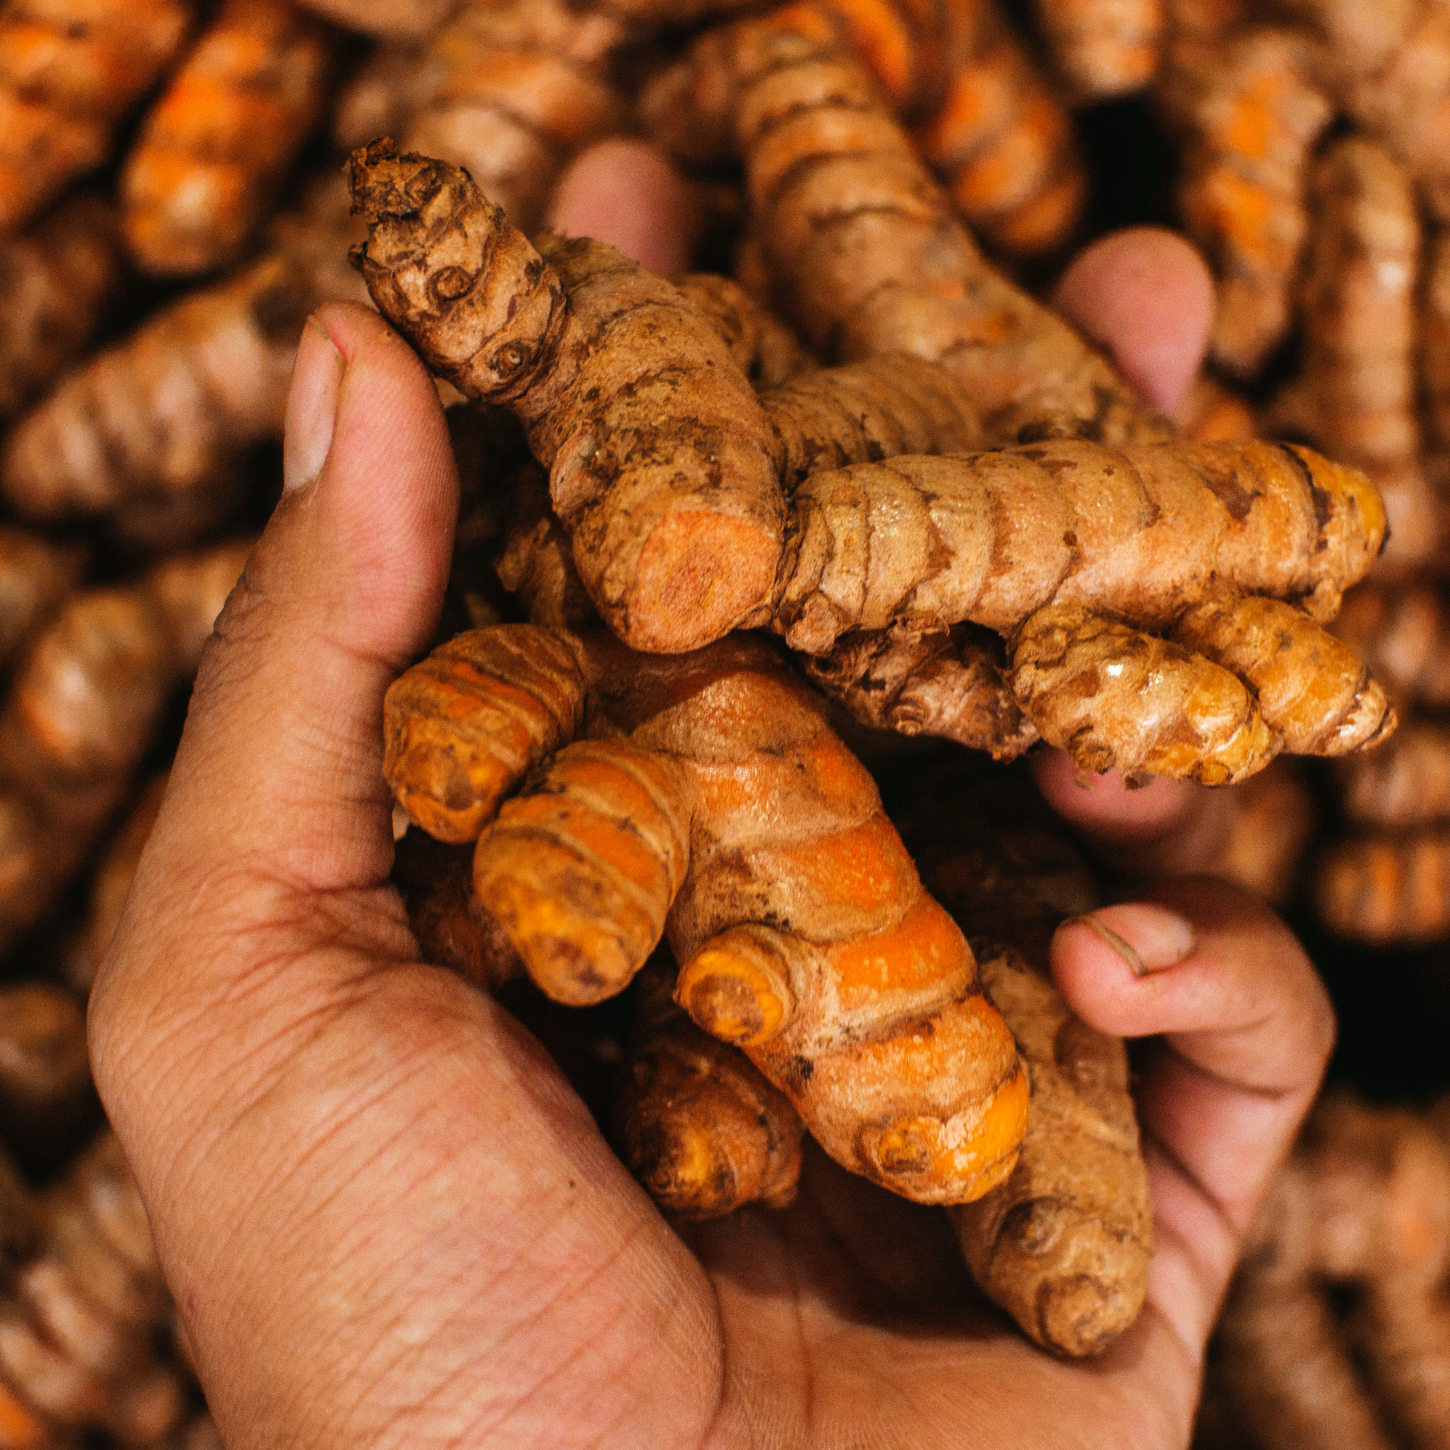 Turmeric: The Golden Miracle Spice